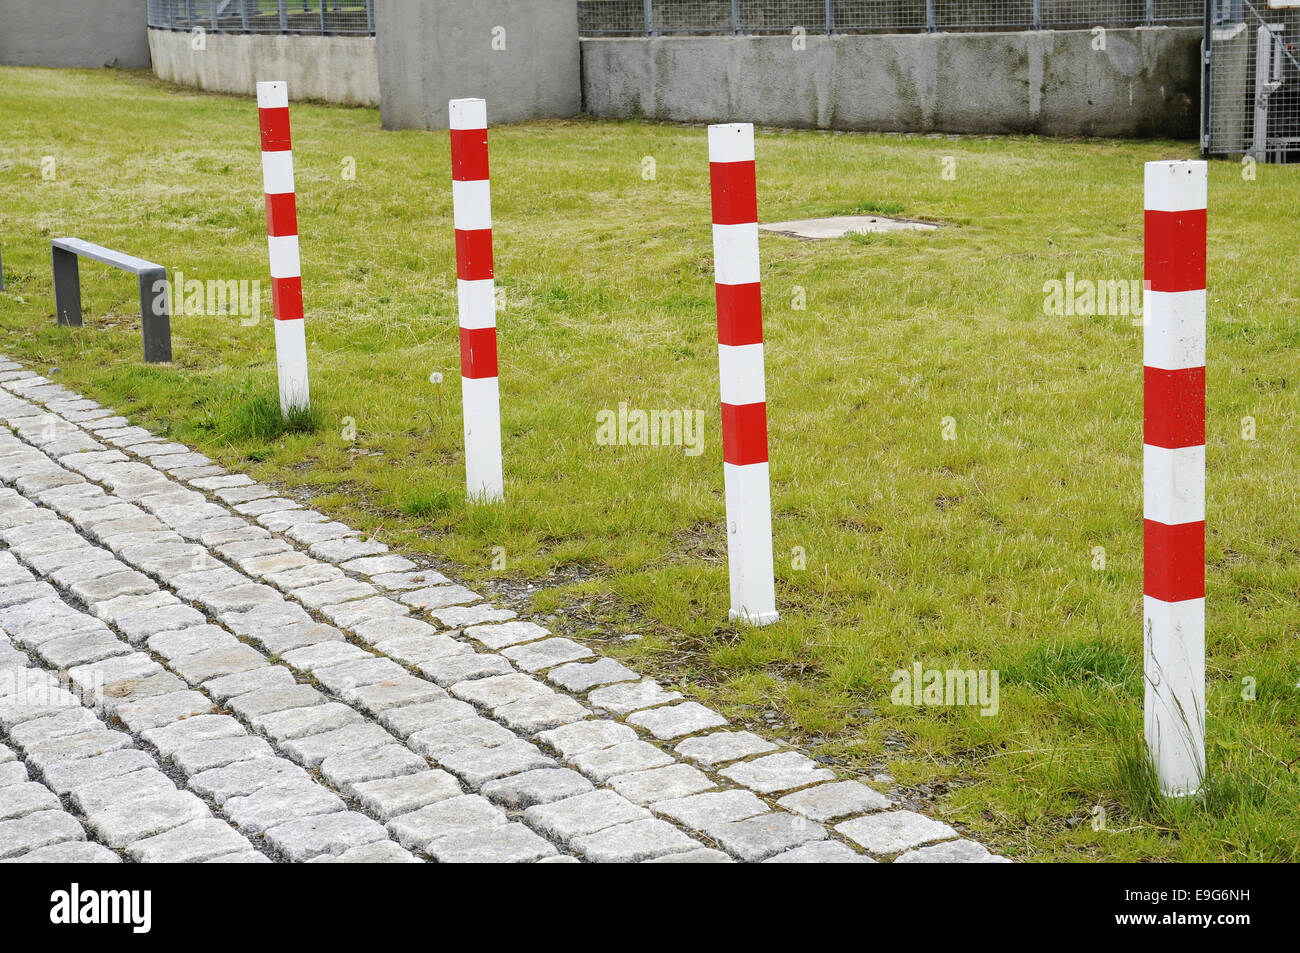 Red and white barrier, Dortmund, Germany Stock Photo